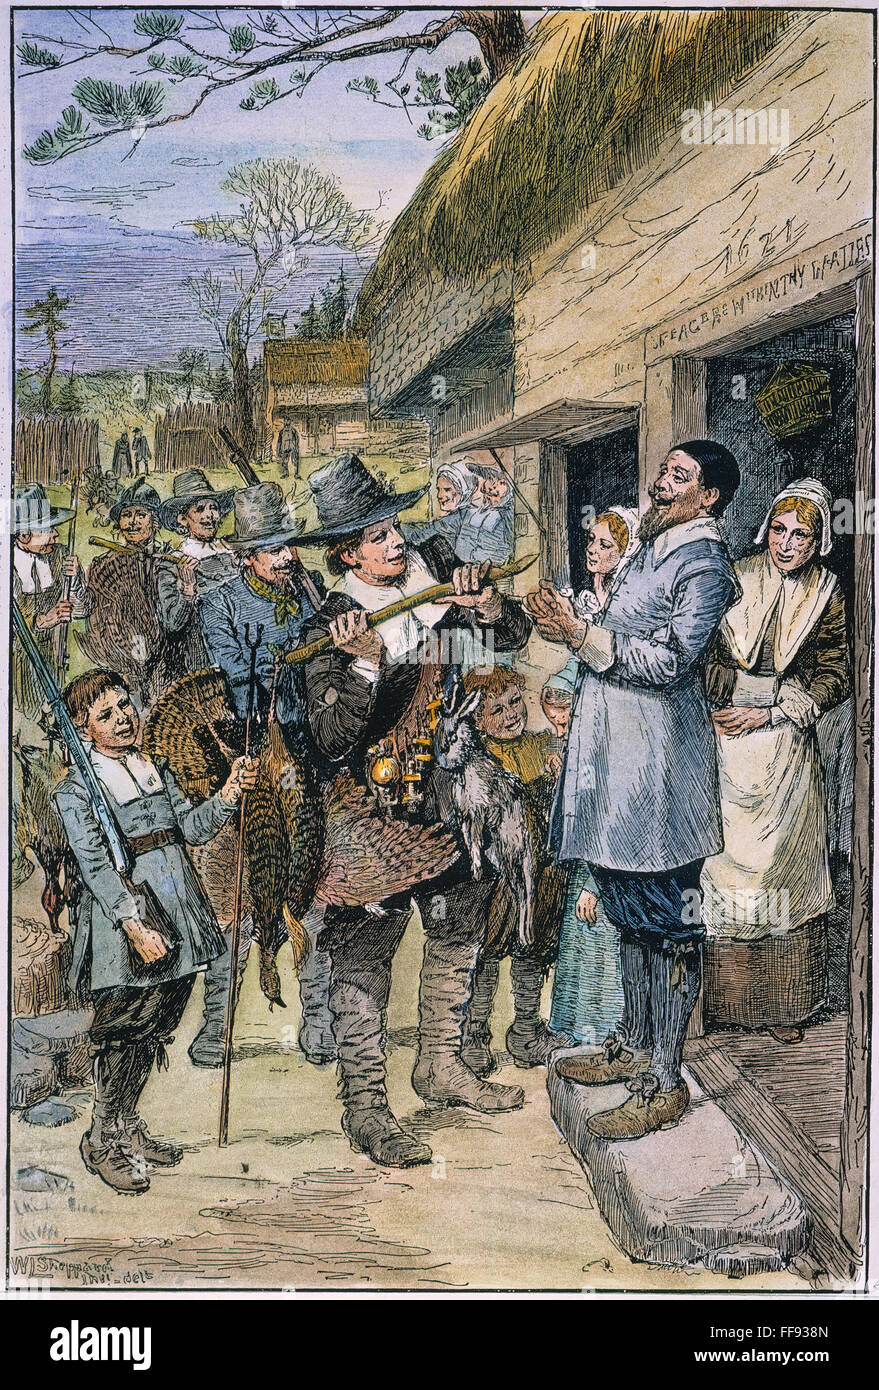 PILGRIMS: THANKSGIVING, 1621. /n'After the first harvest of the colonists at Plymouth, in 1621, Governor Bradford sent four men out fowling, that they 'might after a more special manner rejoice together.'' American engraving, 19th century, drawn by W.F. S Stock Photo